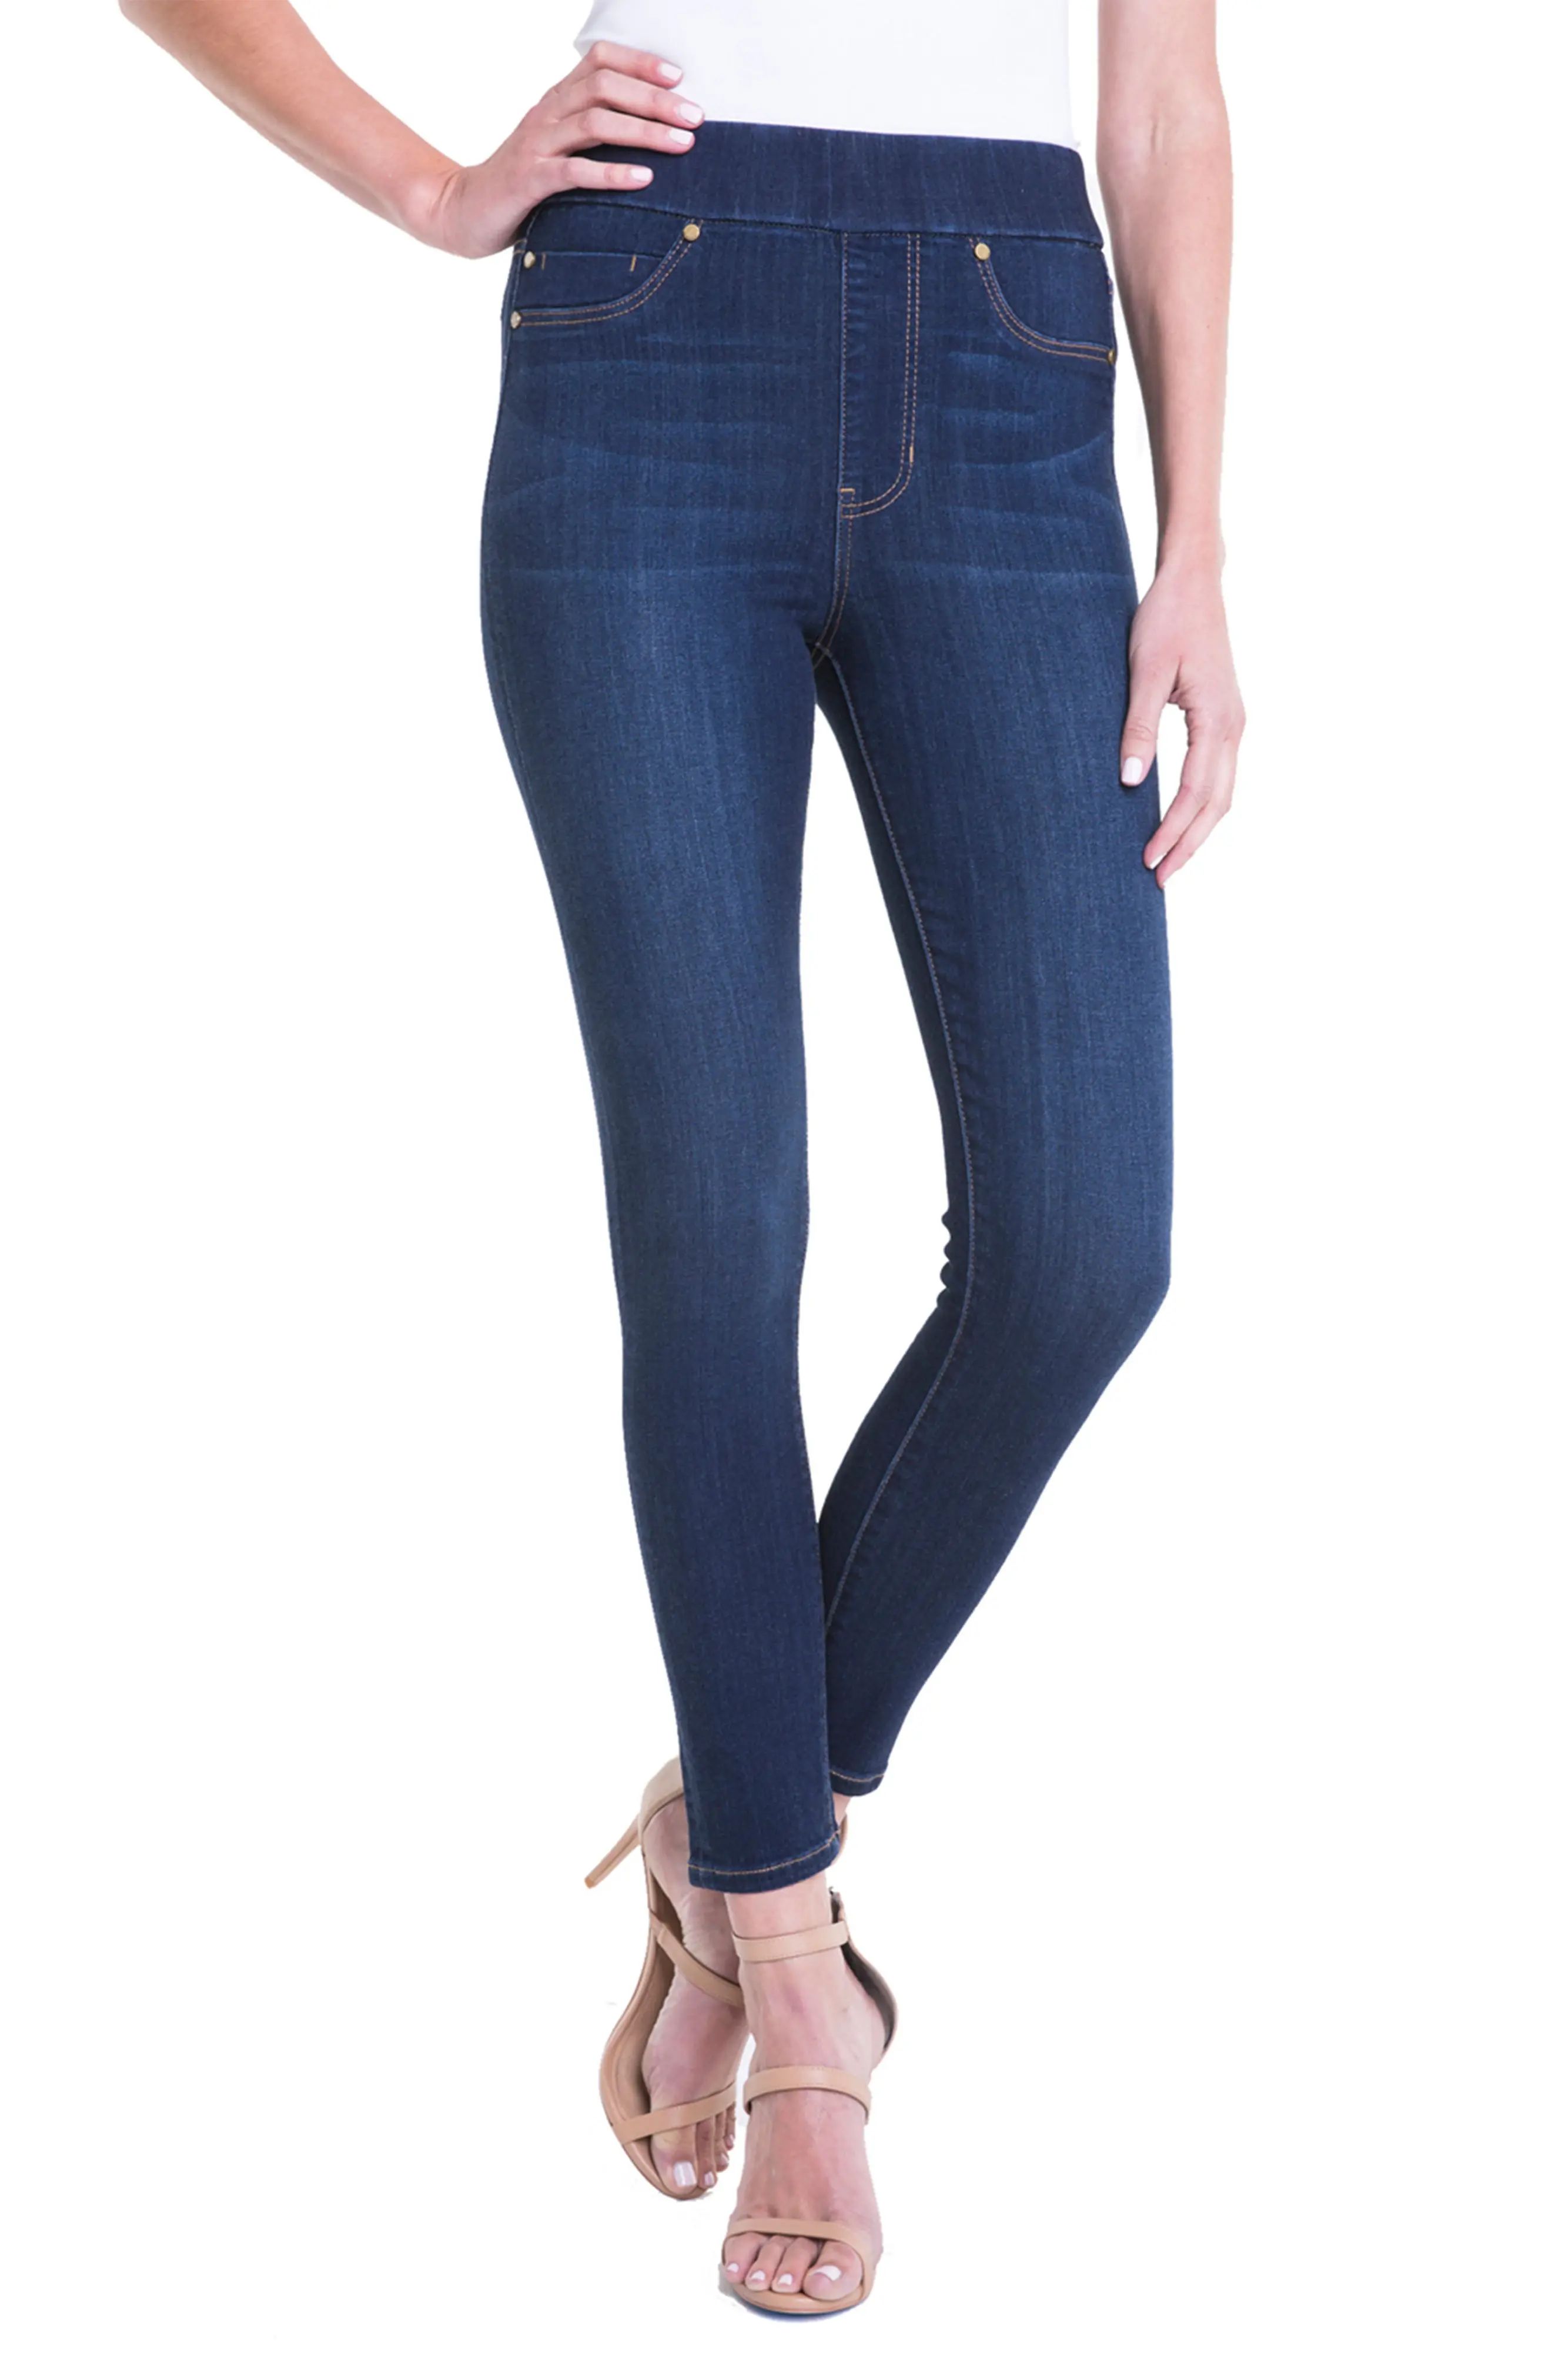 Women's Liverpool Jeans Company Farrah Pull-On Skinny Ankle Jeans, Size 6 - Blue | Nordstrom